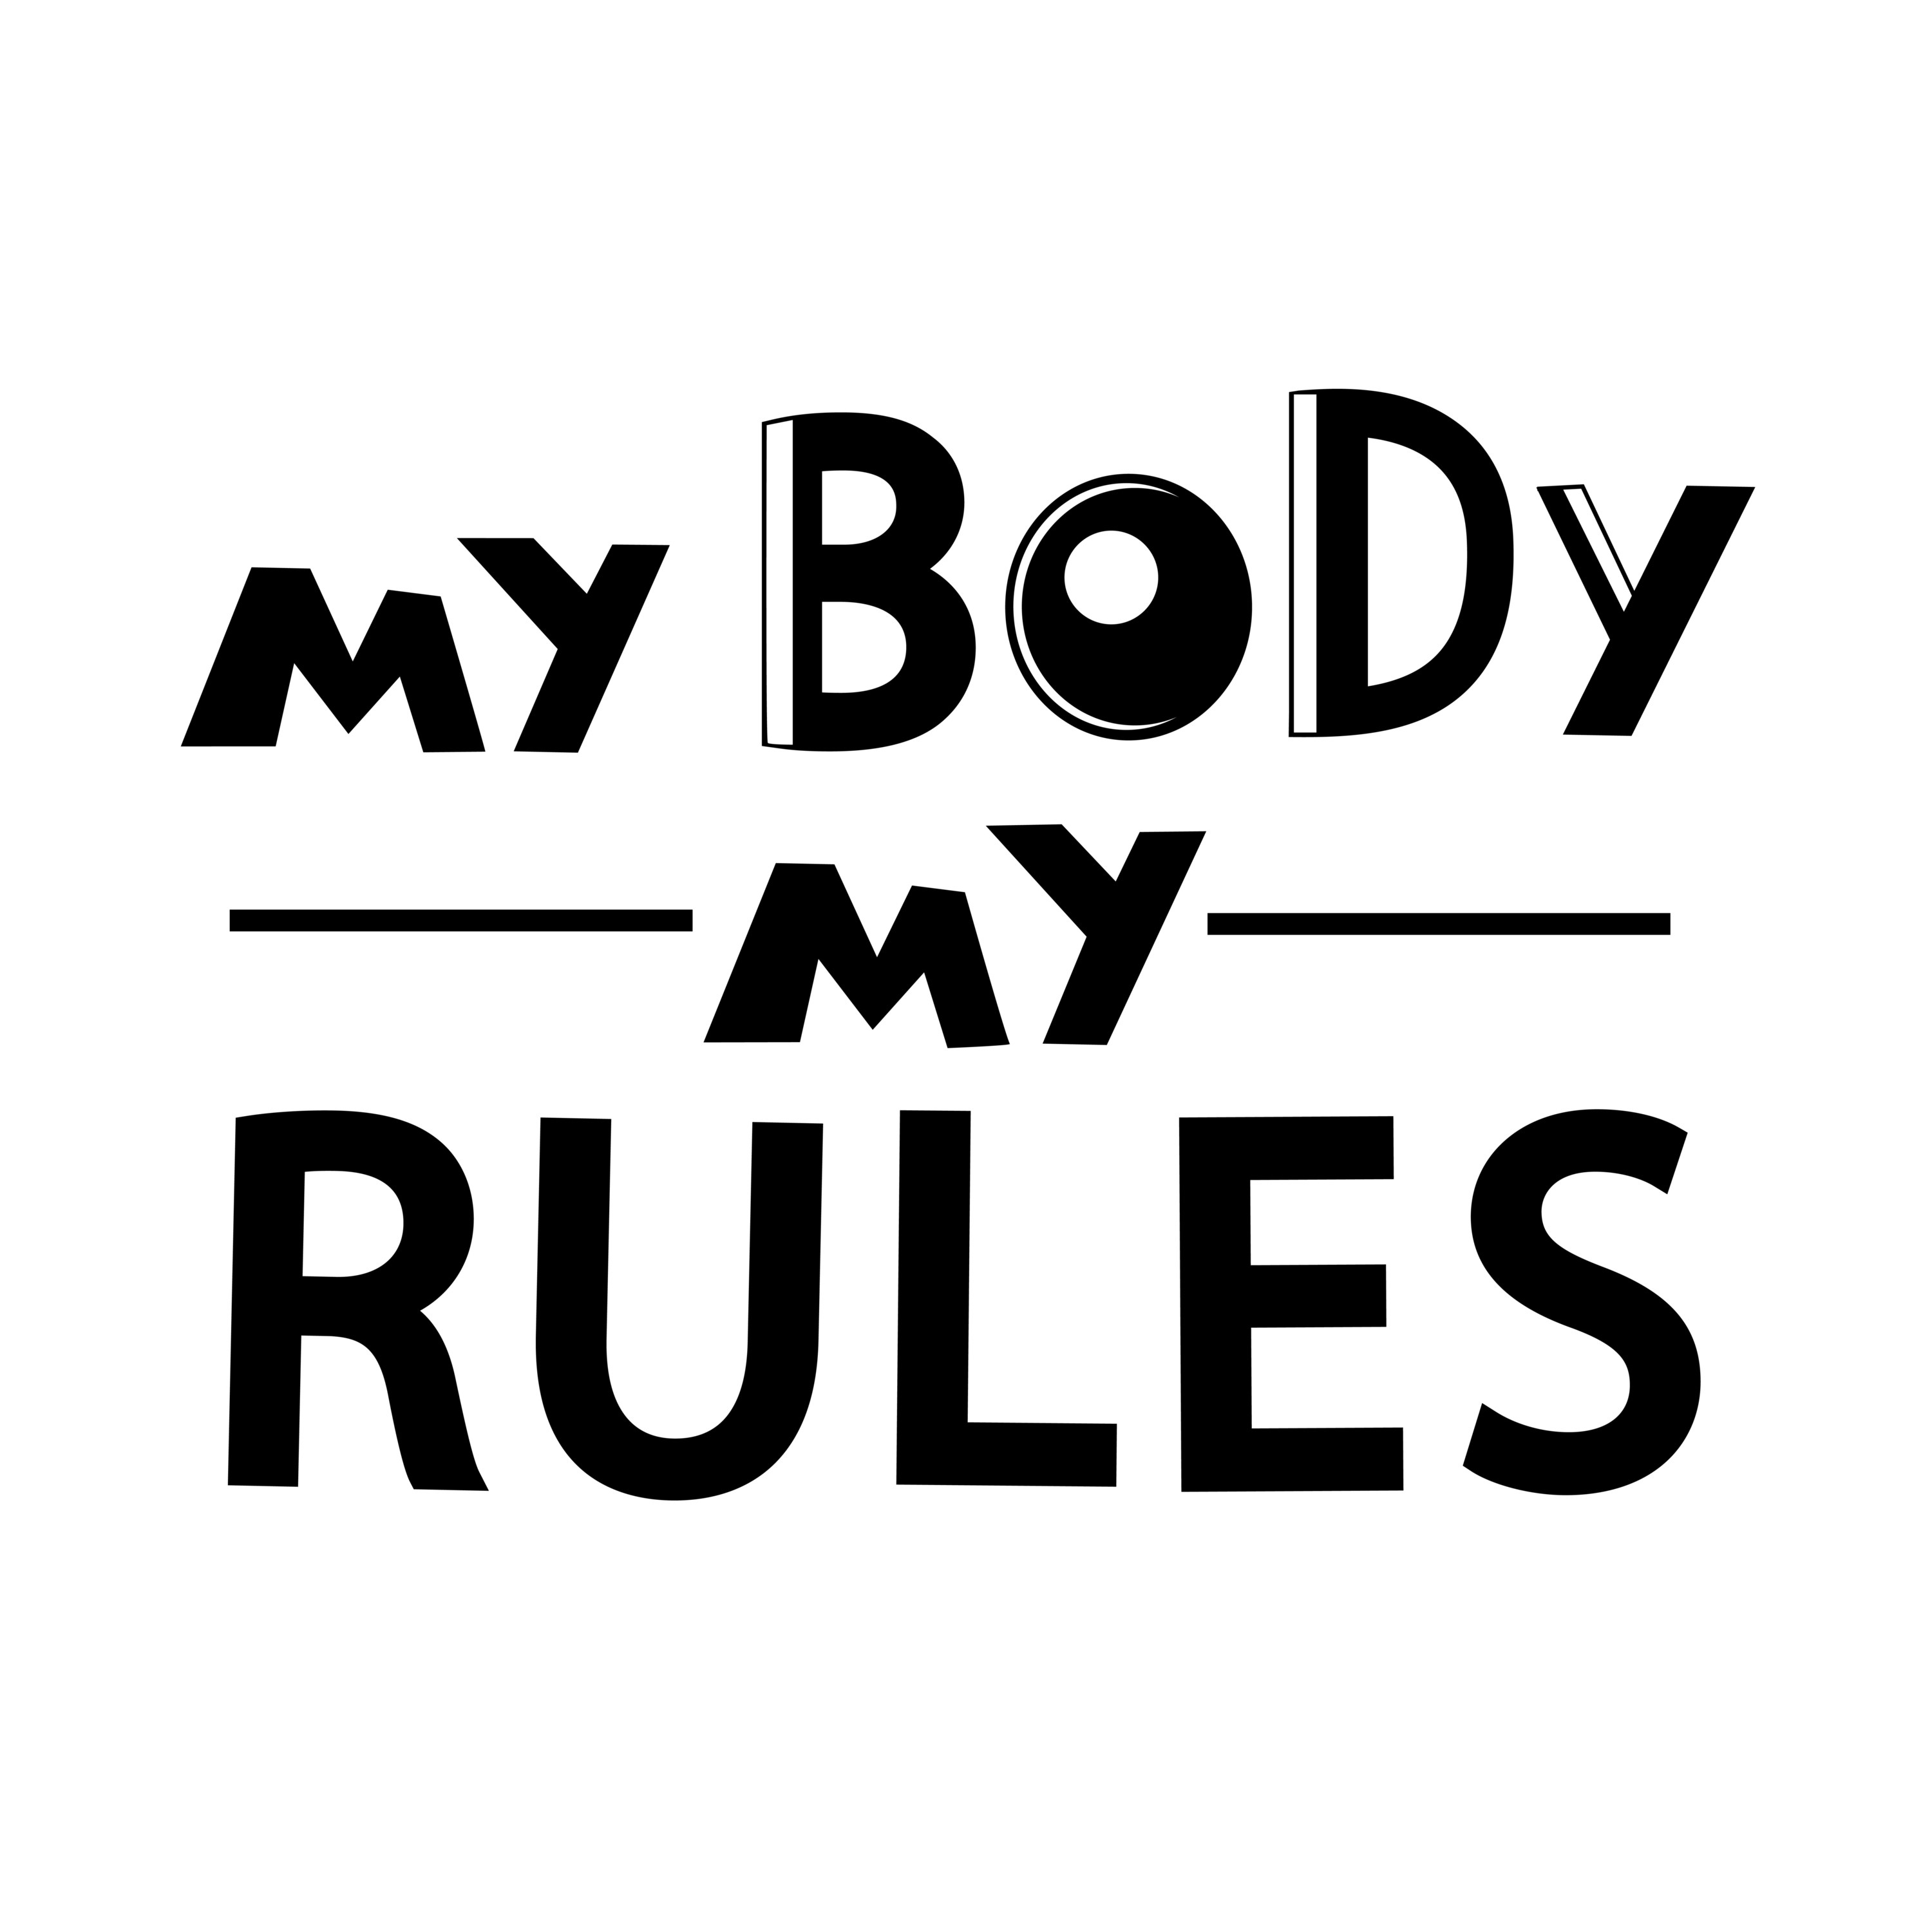 My body my rules sign